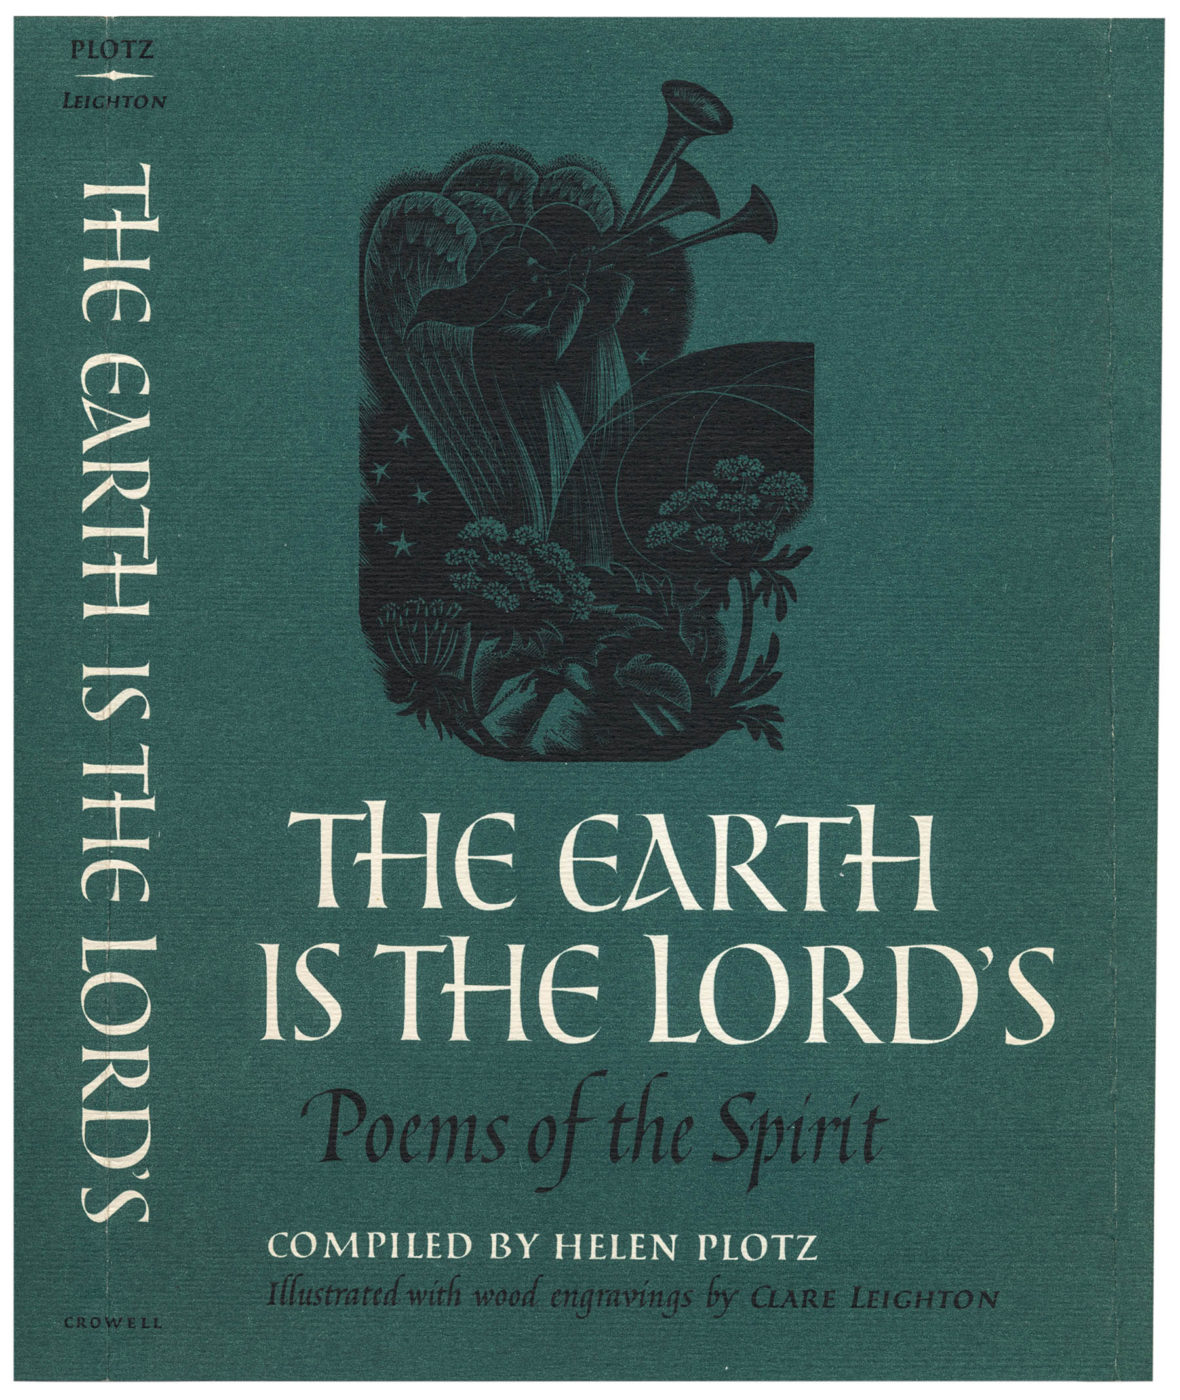 The Earth is the Lord’s